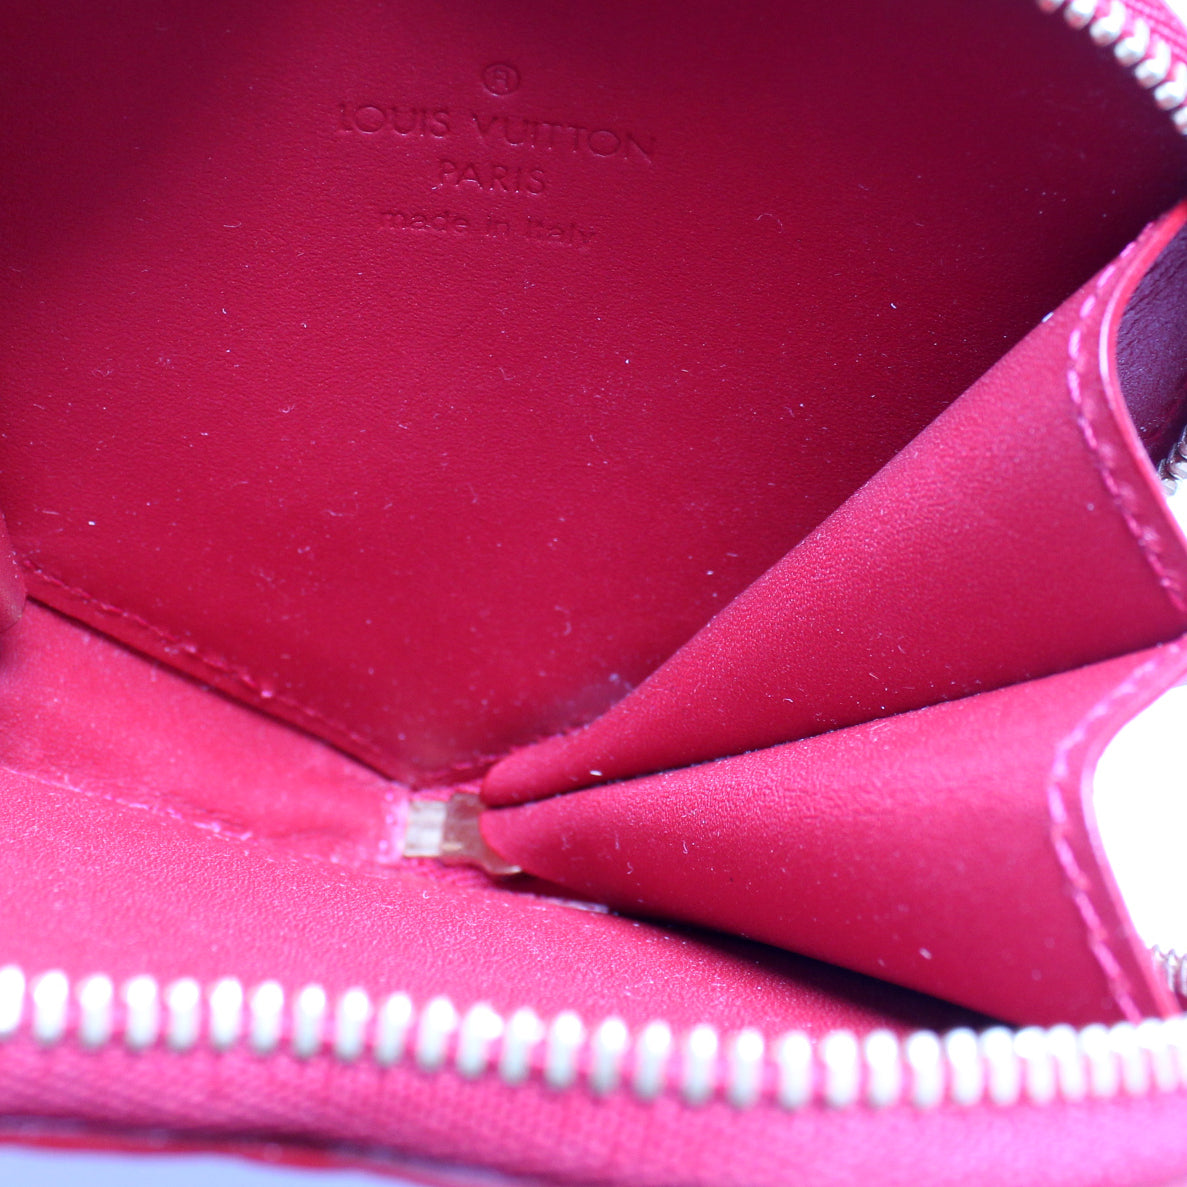 Louis Vuitton-Vernis Heart Coin Pouch - Couture Traders